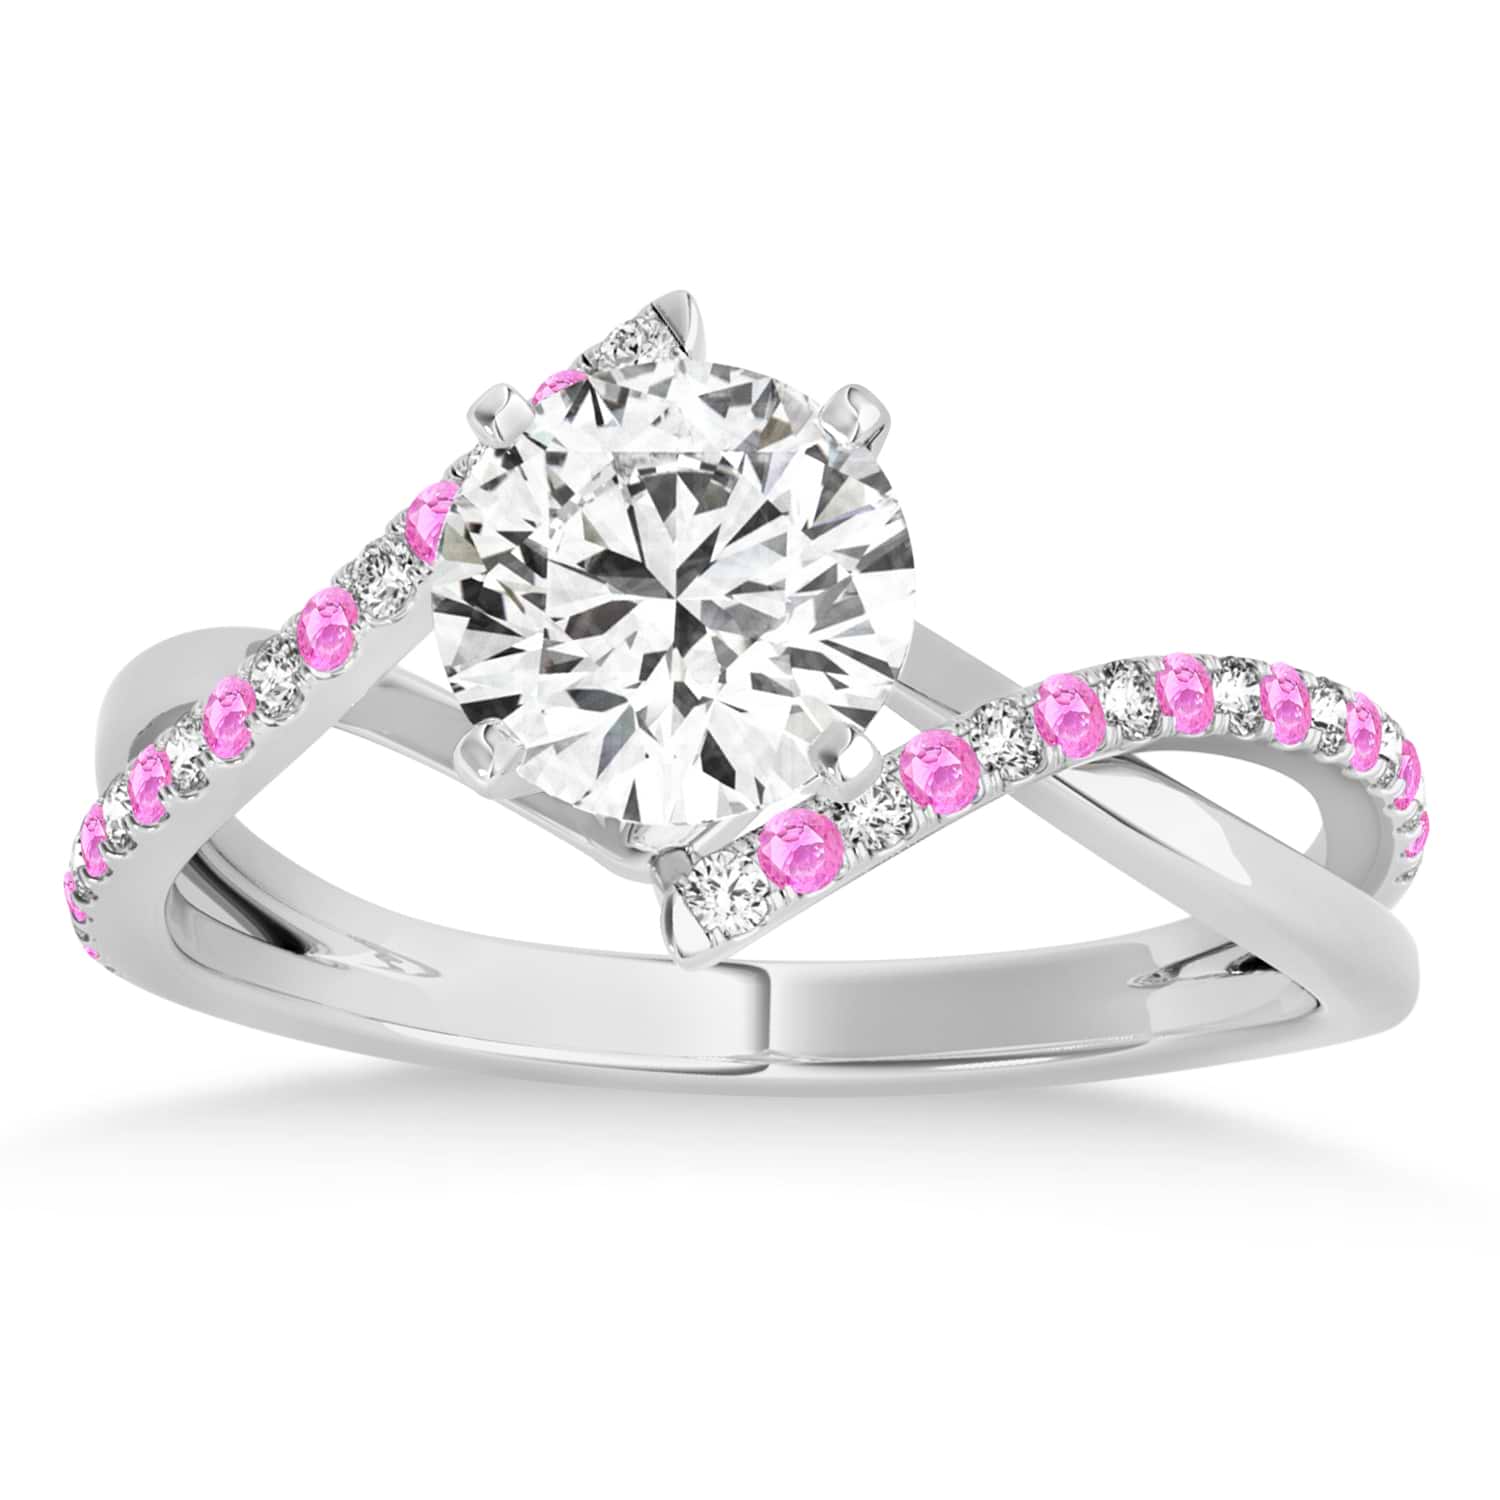 Diamond & Pink Sapphire Bypass Semi-Mount Ring in 18k White Gold (0.14ct)